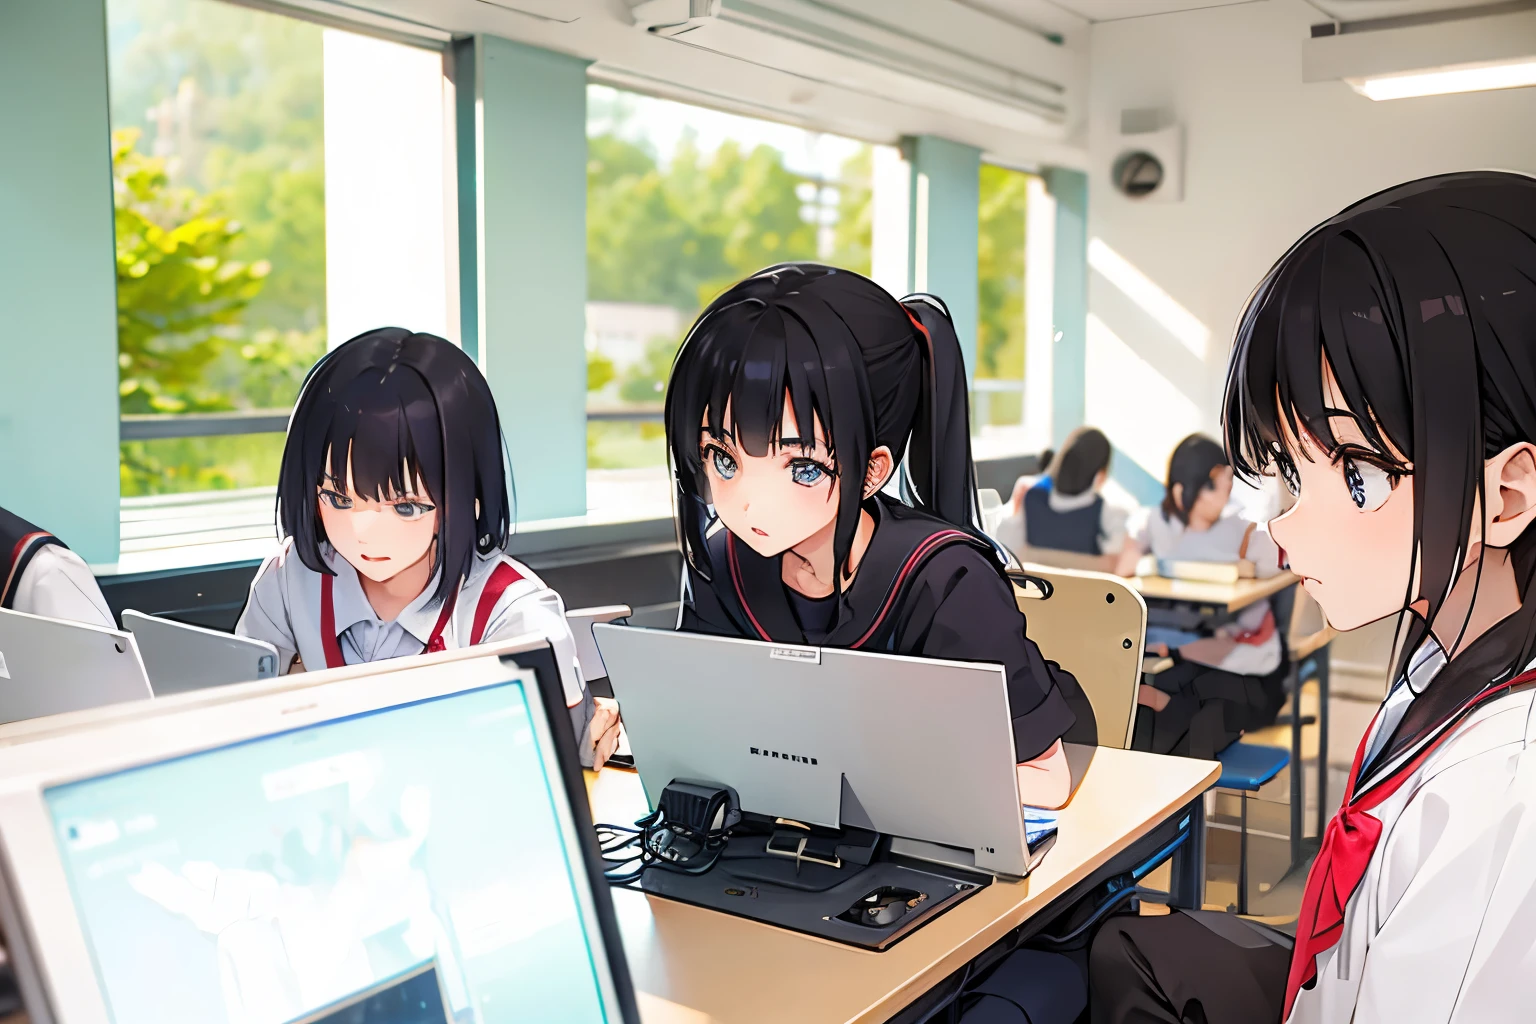 Japanese high school、in the computer room３high school students are looking at the monitor,２people are high school girls,１man male college student,２D&#39;s anime style